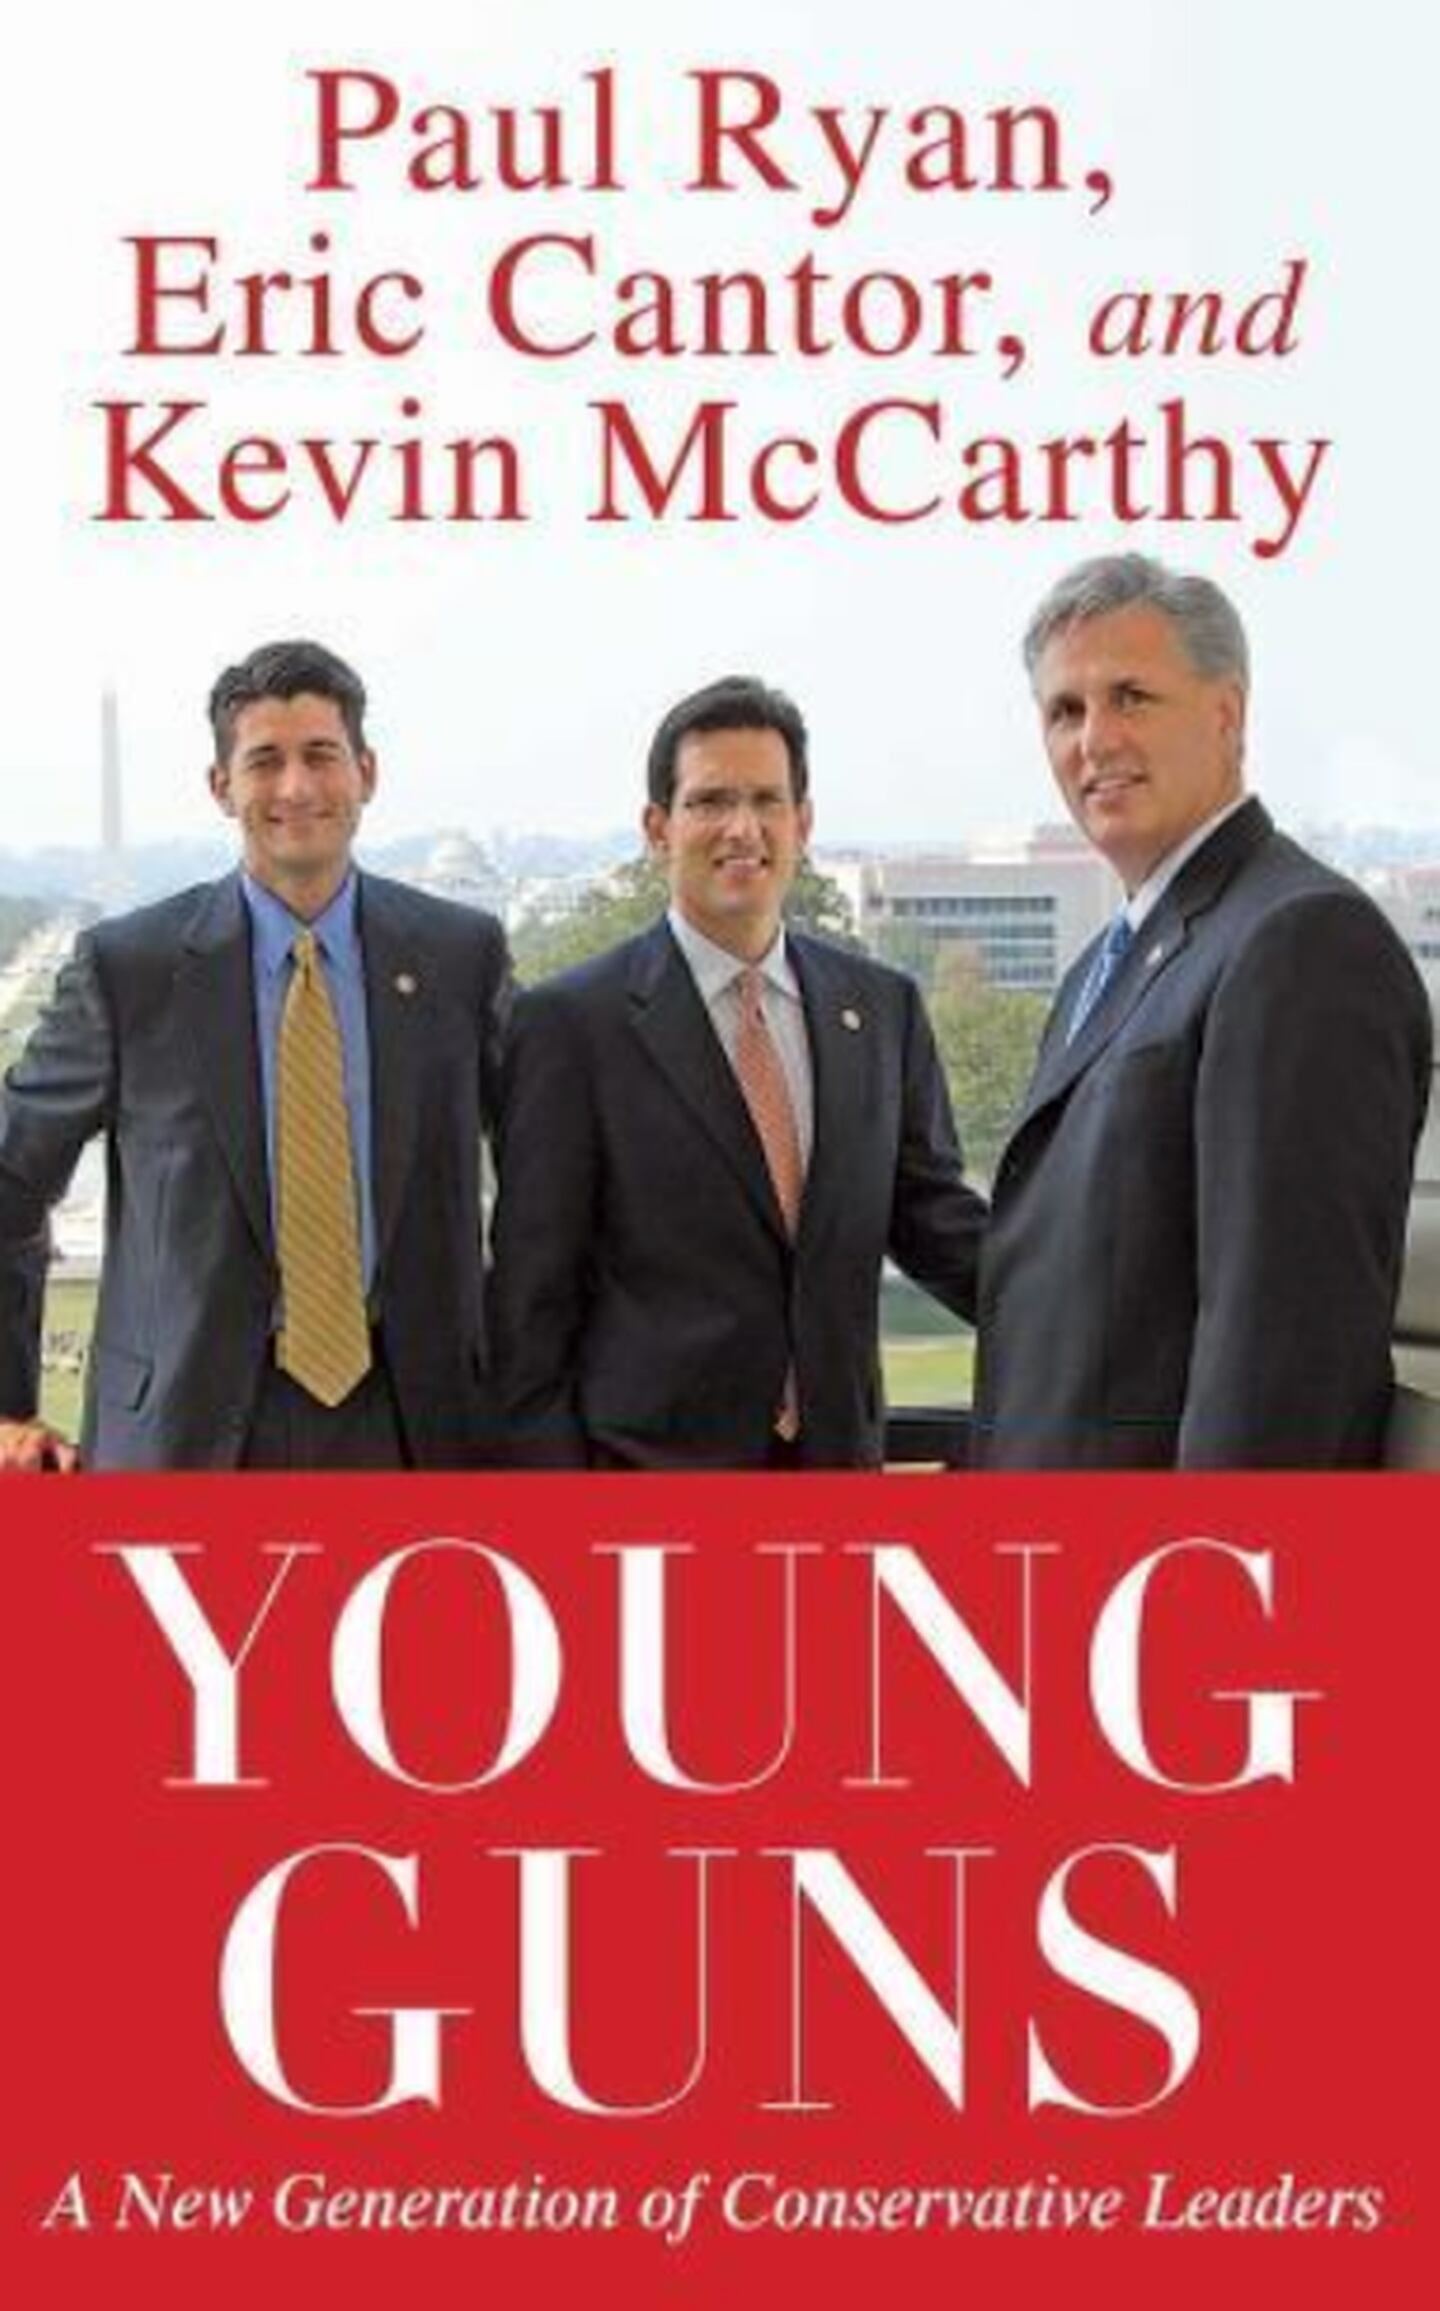 Young Guns, co-authored by Paul Ryan, Eric Cantor and Kevin McCarthy in 2010